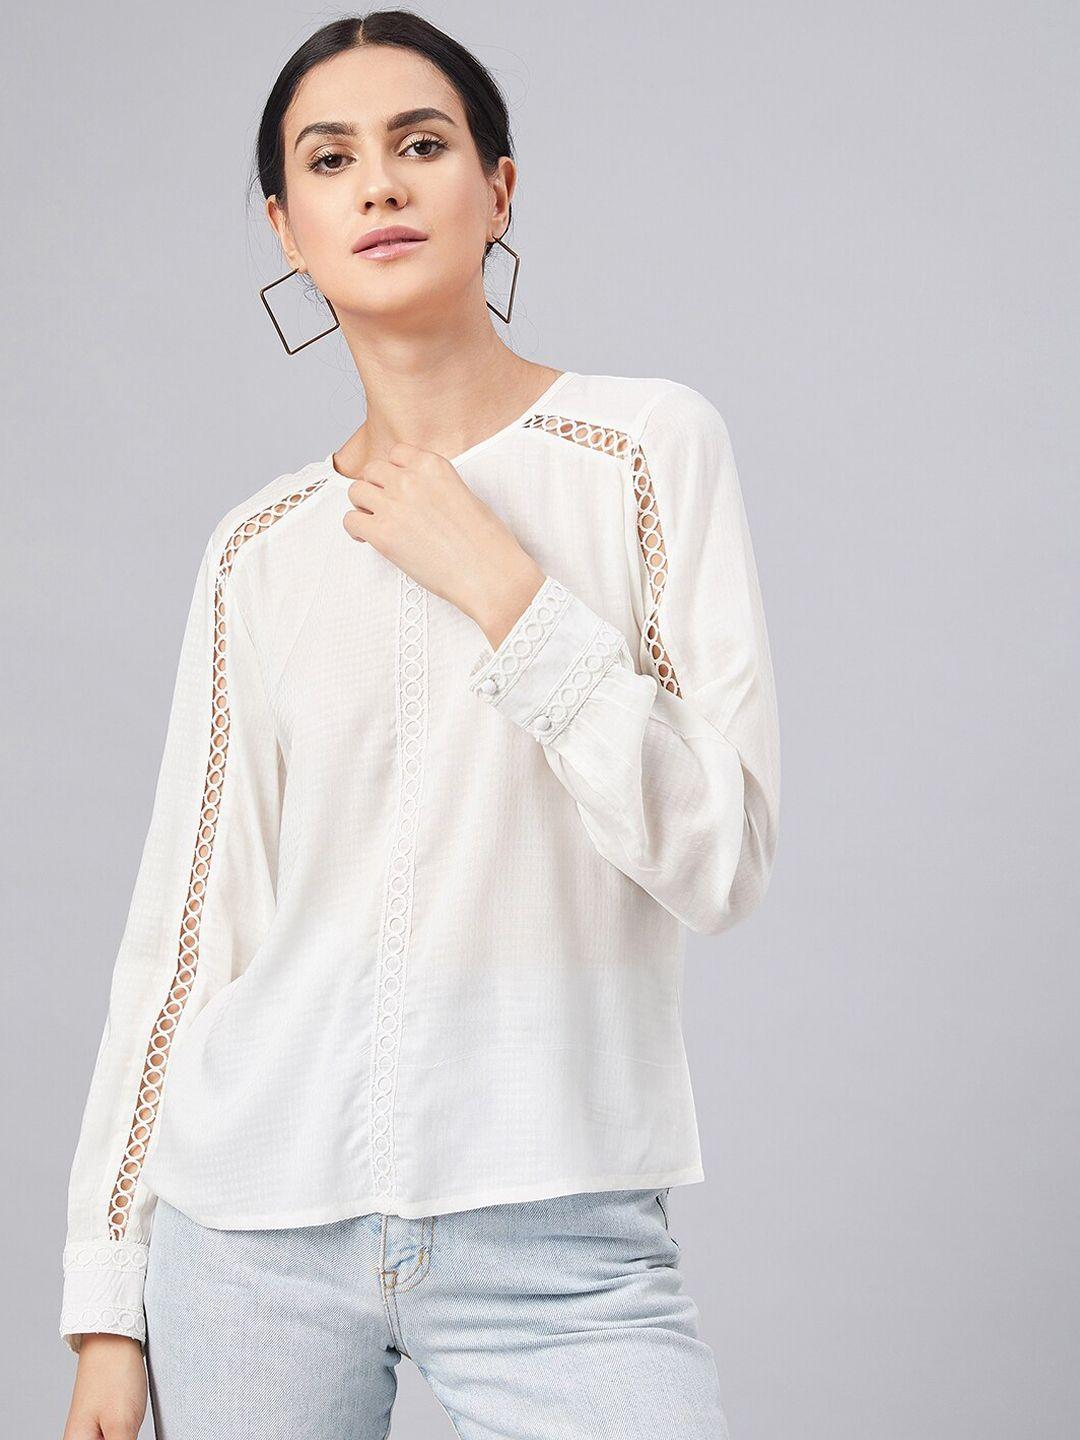 marie-claire-women-white-solid-top